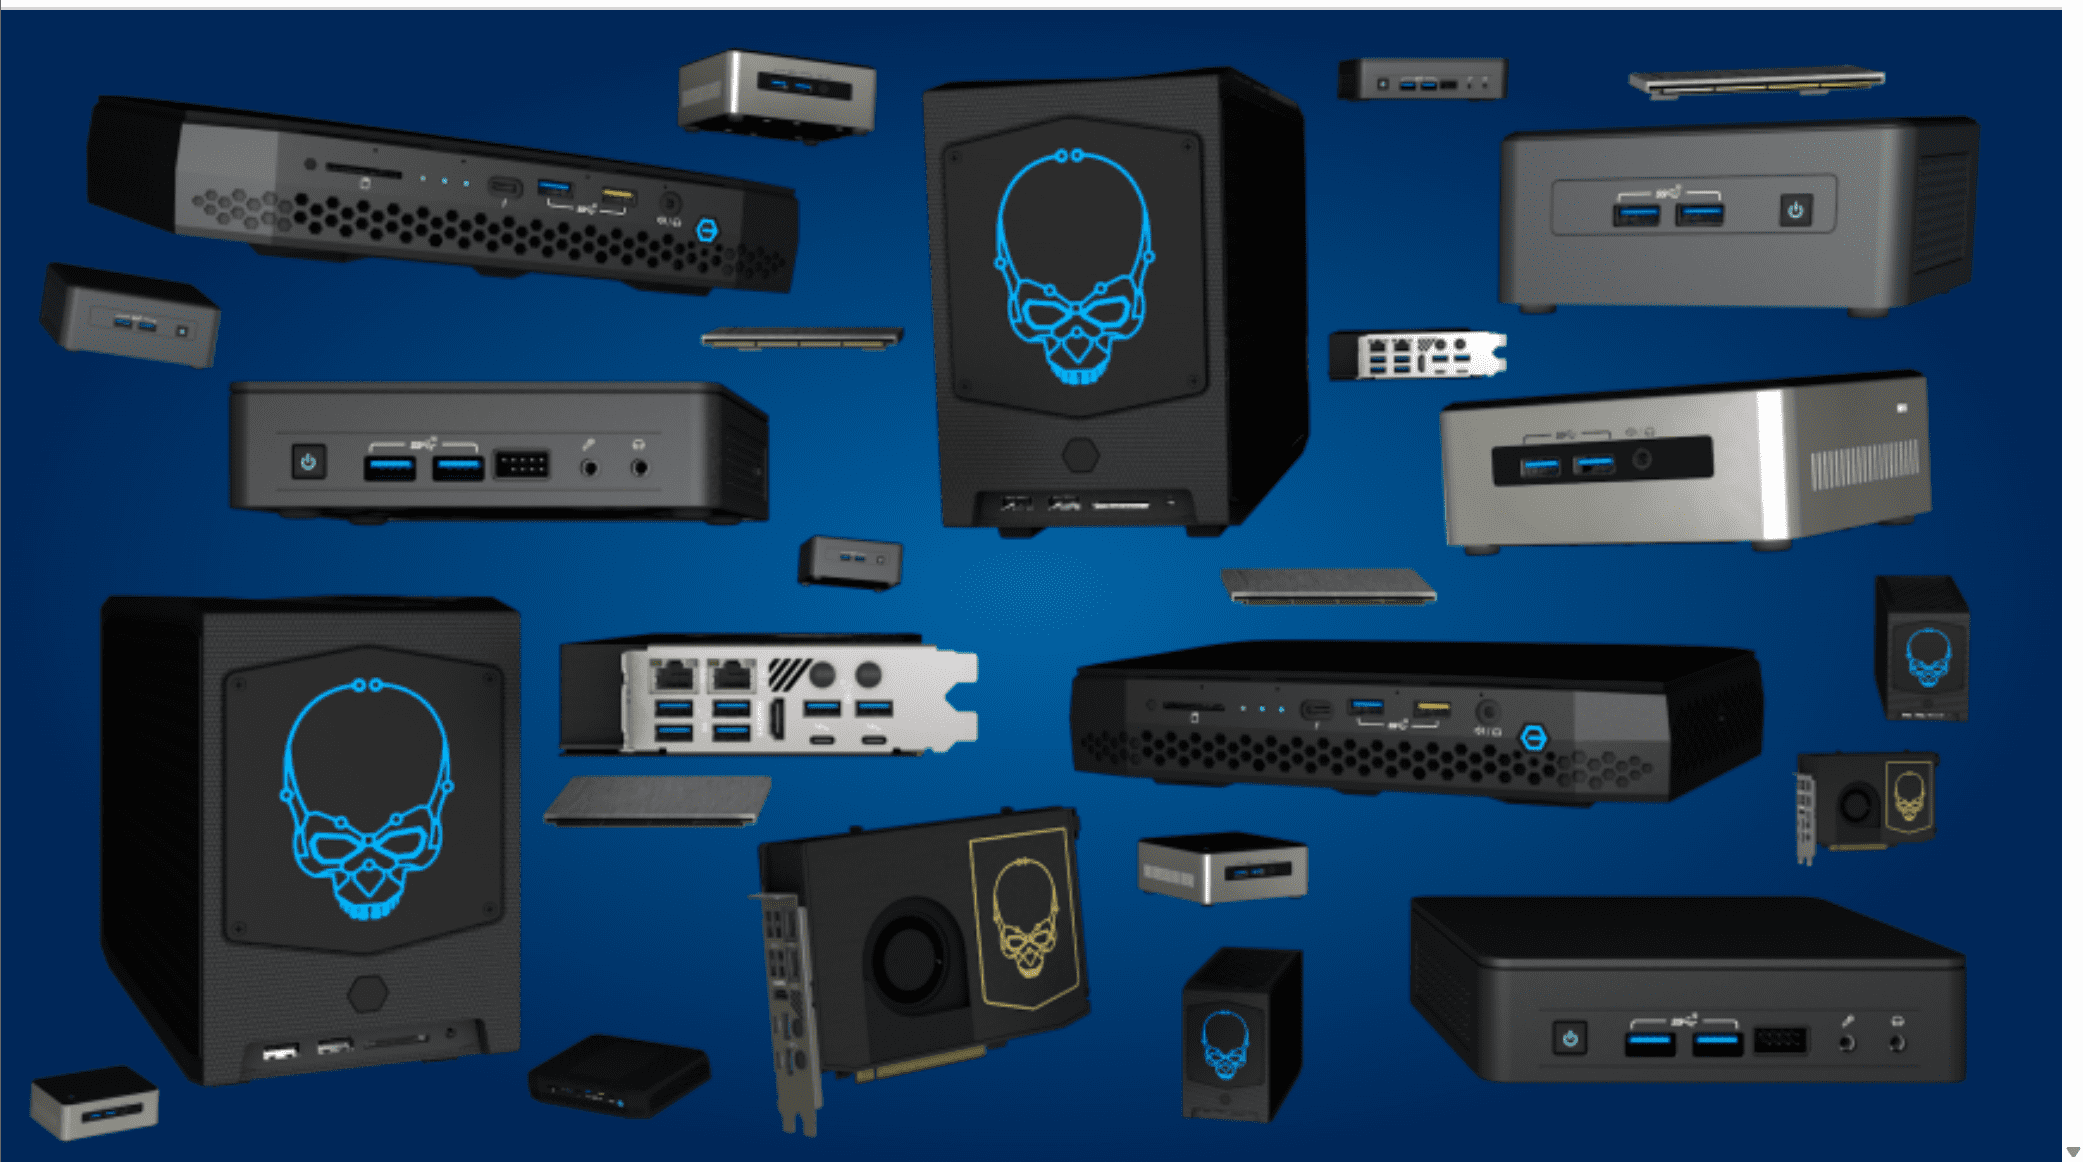 Intel NUCs are great hardware for your home lab